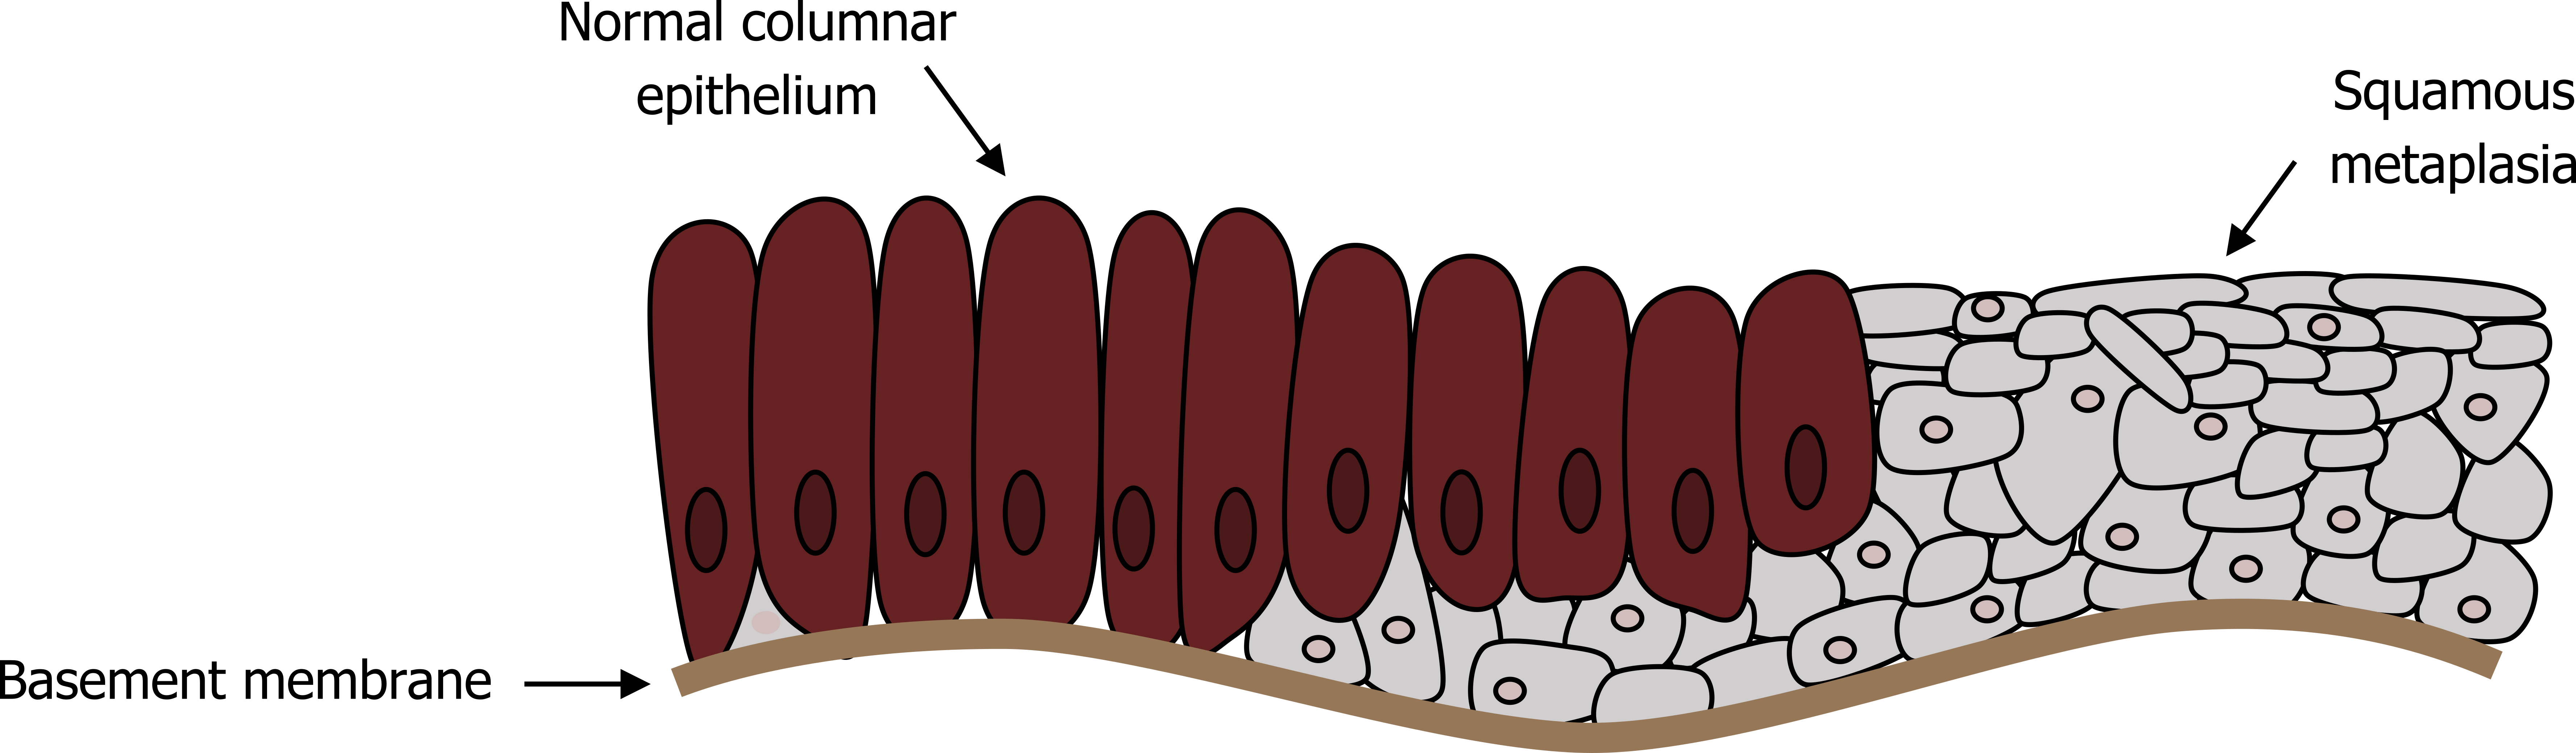 Cartoon of airway epithelium section shown with normal rectangular shaped cell projecting in the airway lumen on the left of the cartoon. These colored red are labelled normal columnar epithelium. Towards the right these normal cells transition is a overlapping more circular depictions of cells. These cells are colored gray and labelled squamous metaplasia.